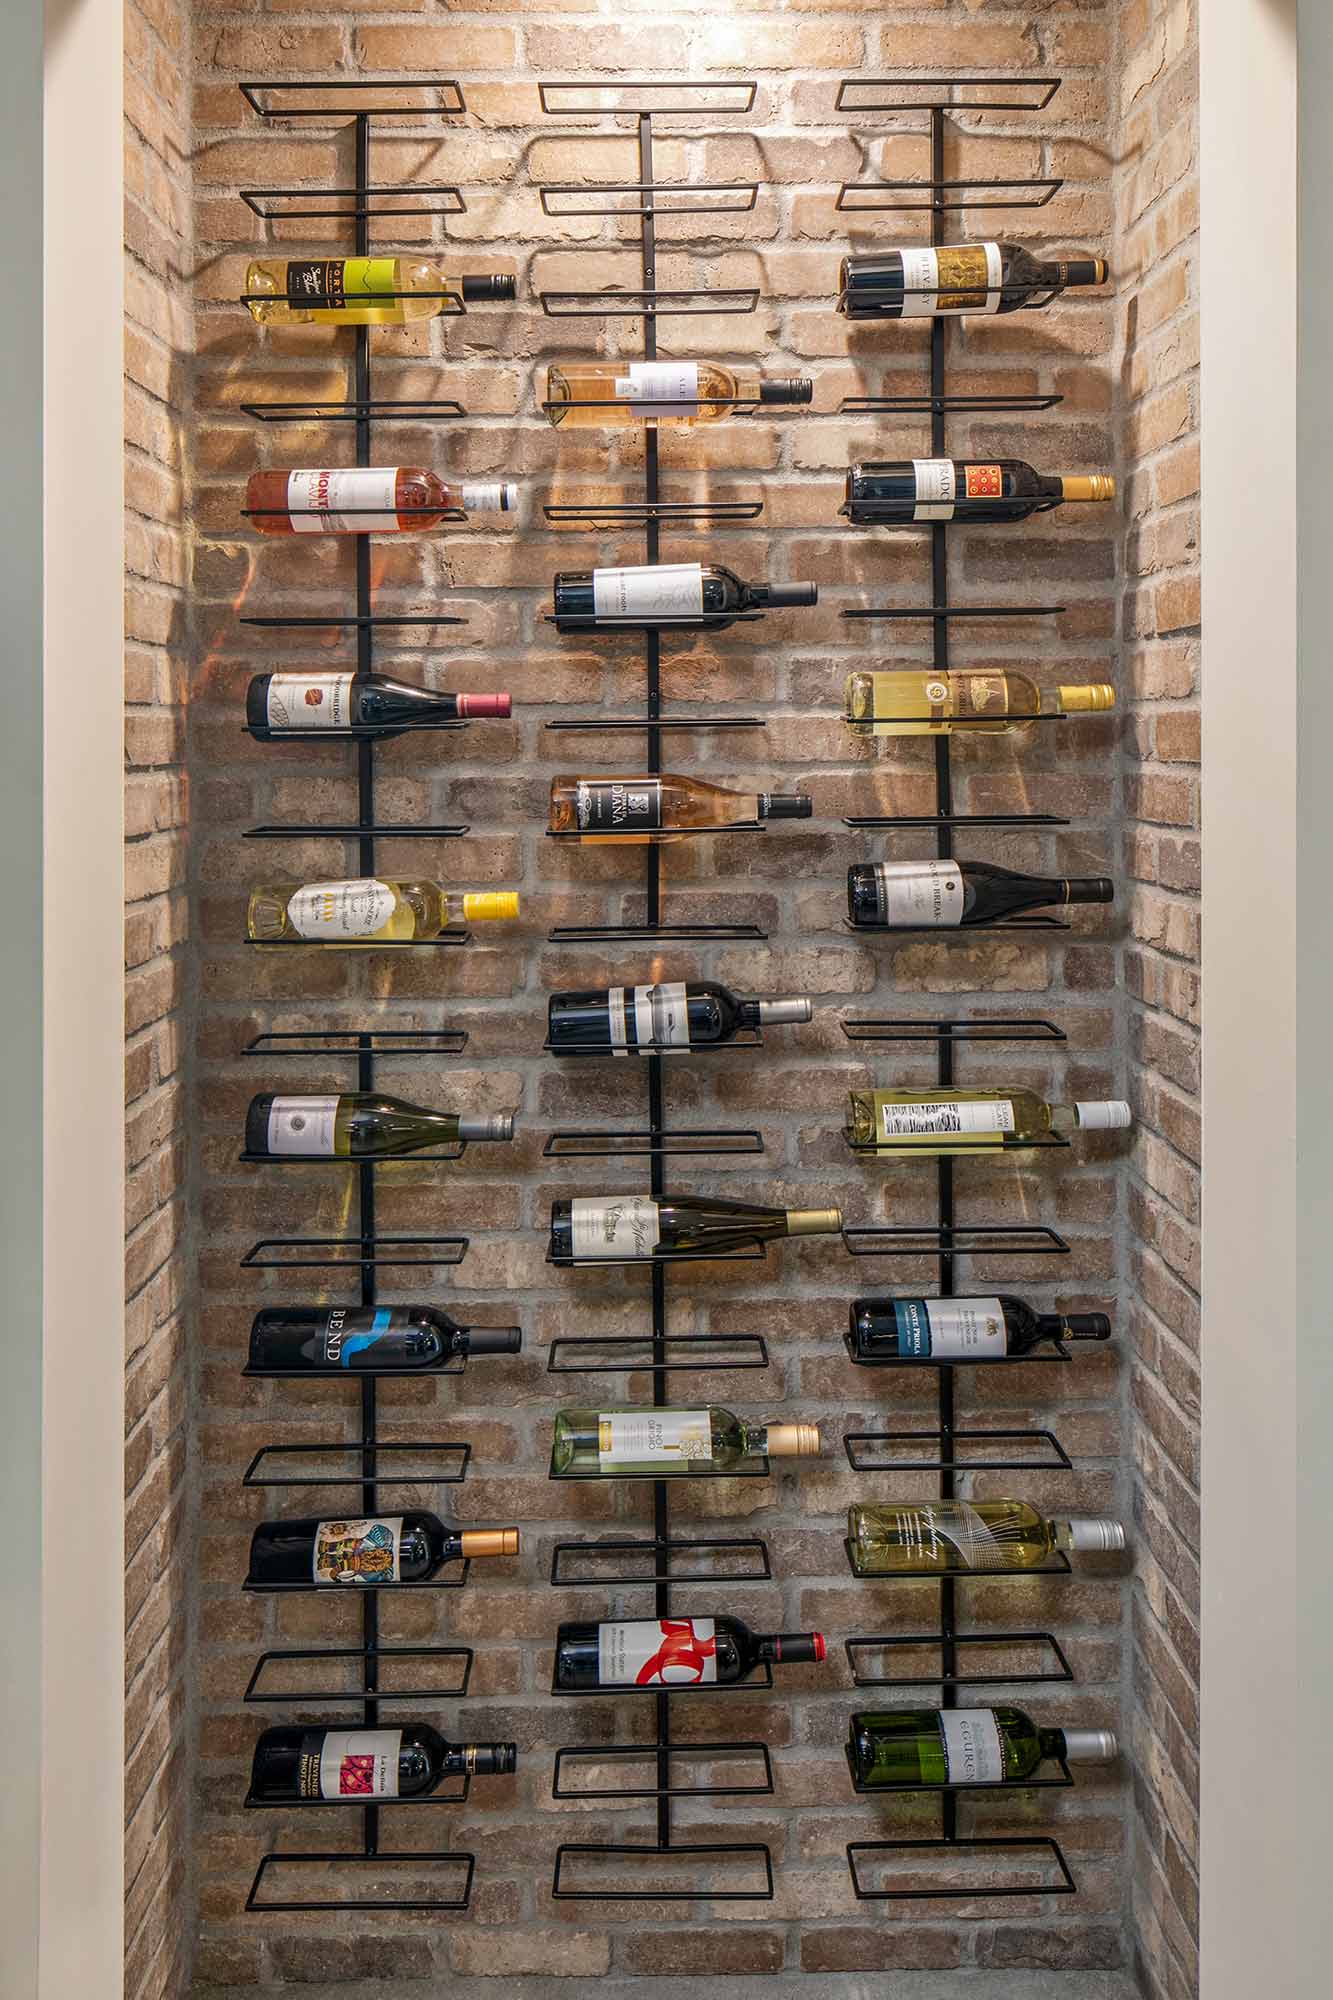 A wall mounted wine rack with many bottles of wine.